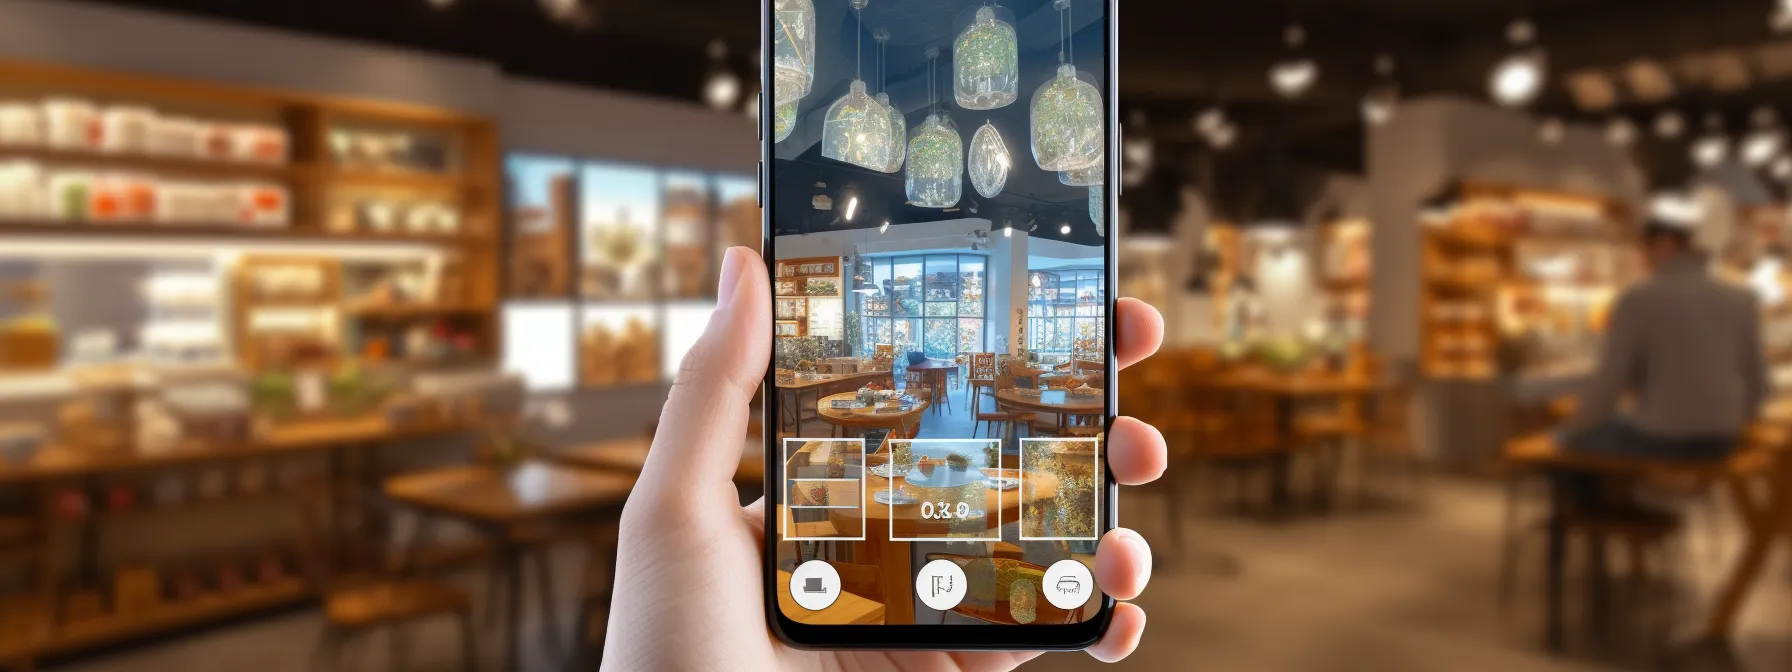 the image could show a person holding a smartphone with voice search results displayed on the screen, surrounded by icons representing local businesses and locations.